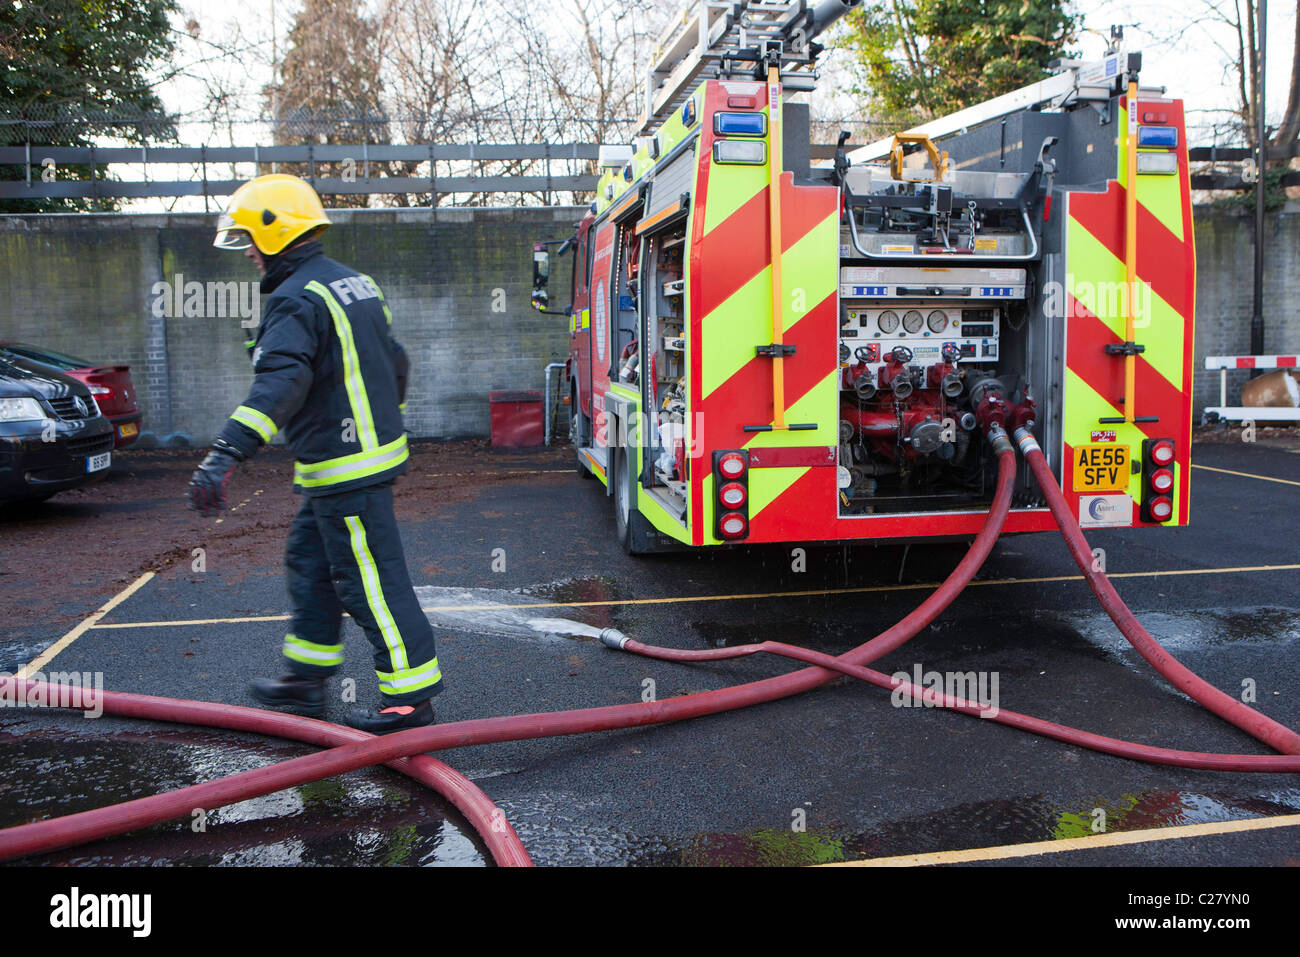 London Fire Brigade, station training session. A Fire fighter connects the hoses to the fire engine. Stock Photo